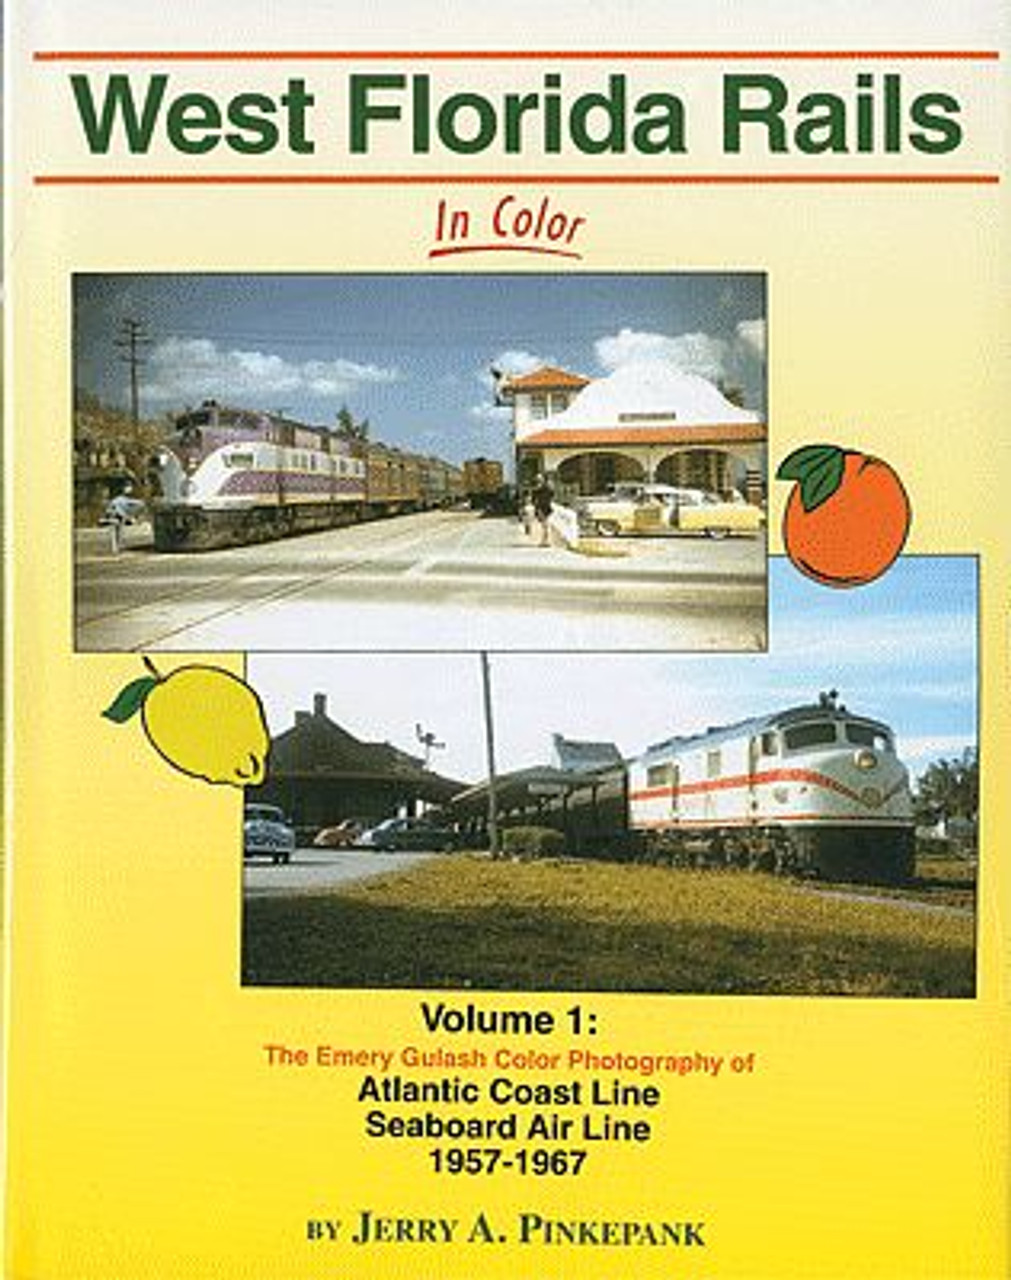 Morning Sun 1489 West Florida Rails In Color Volume 1: The Emery Gulash Color Photography of ACL & SAL 1957-1967